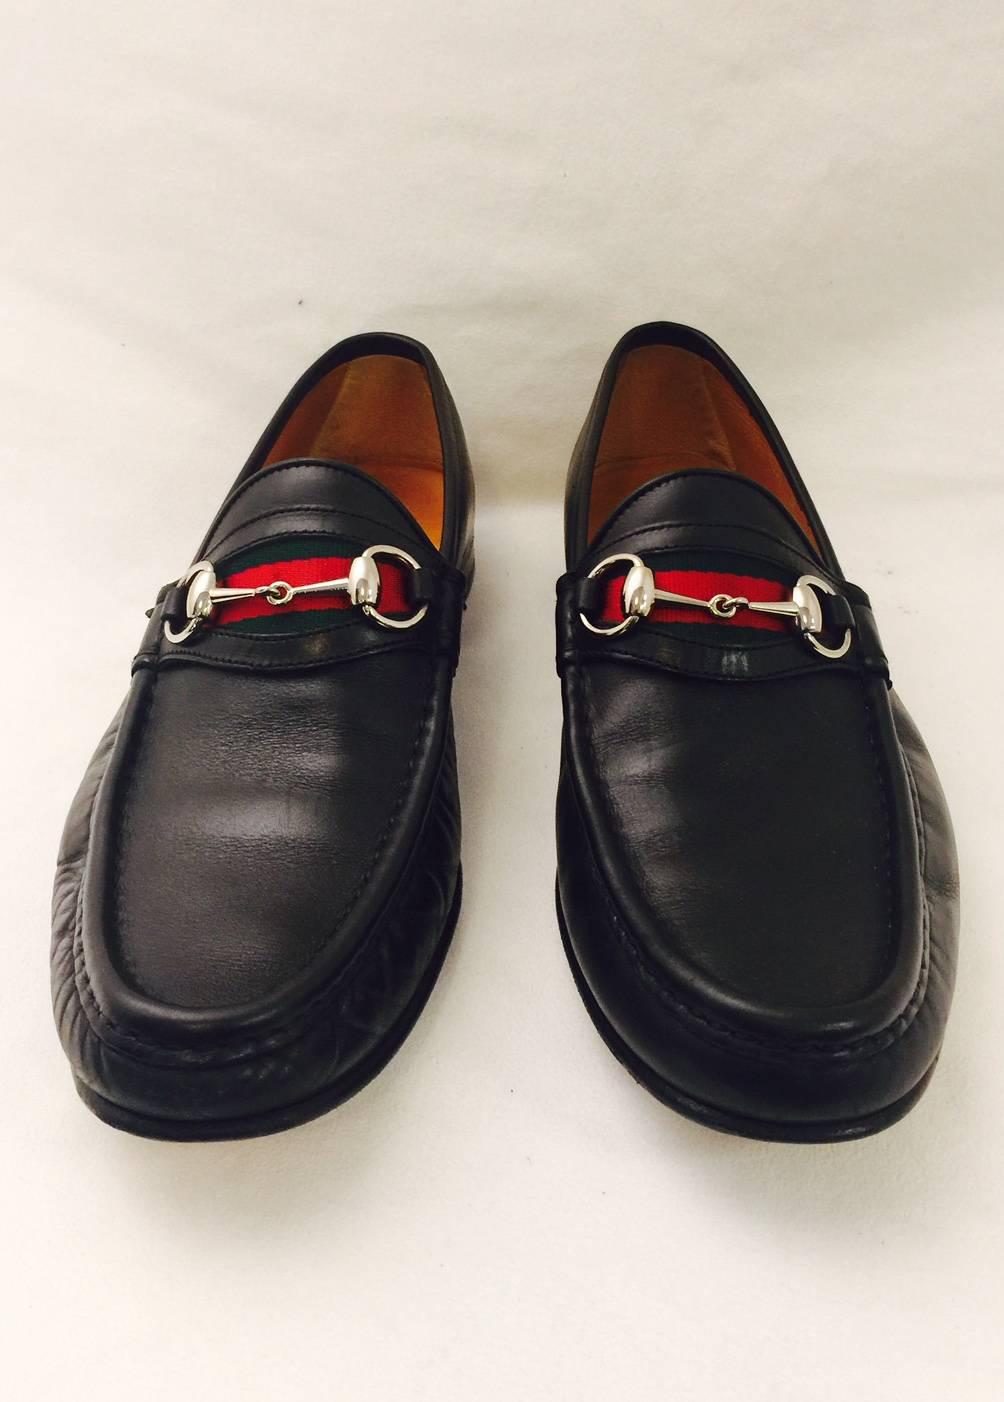 Men's Gucci Penny Loafers with Iconic Ribbon Stripe & Horsebit. Sz 9 1/2 Black 1